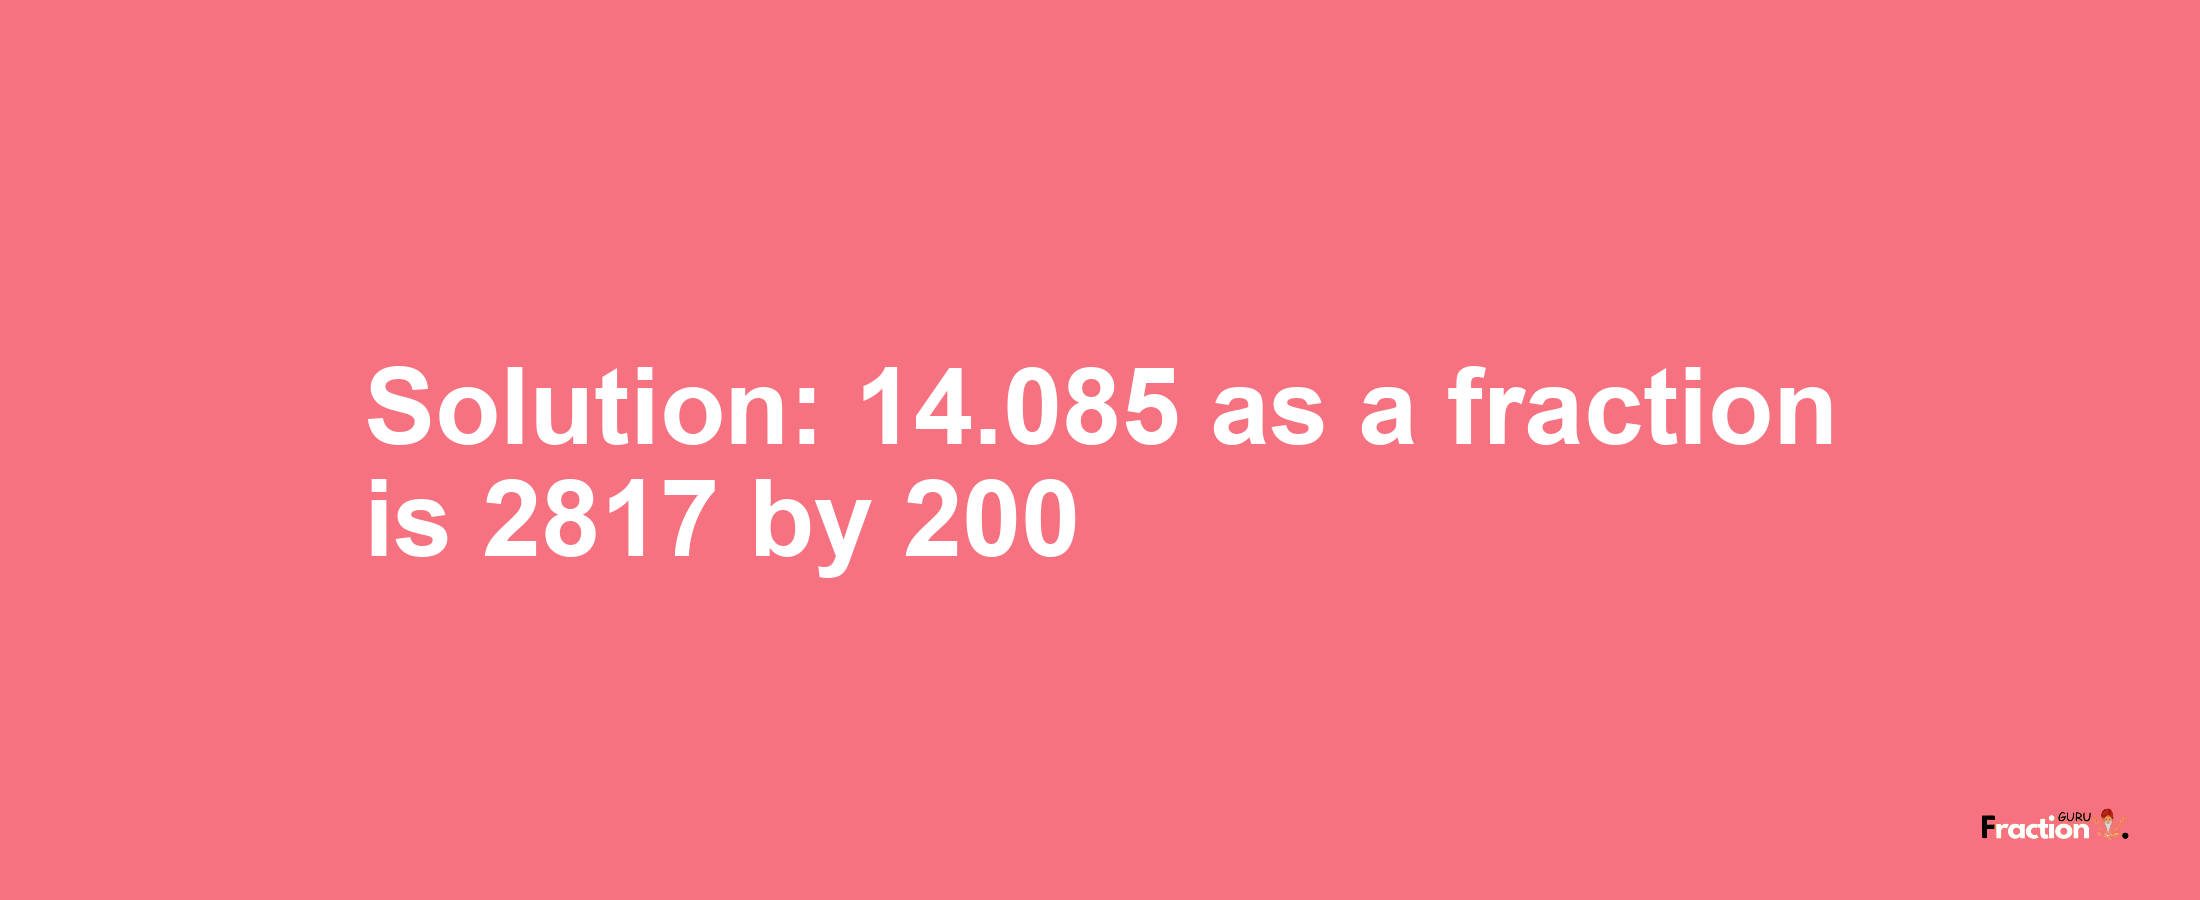 Solution:14.085 as a fraction is 2817/200